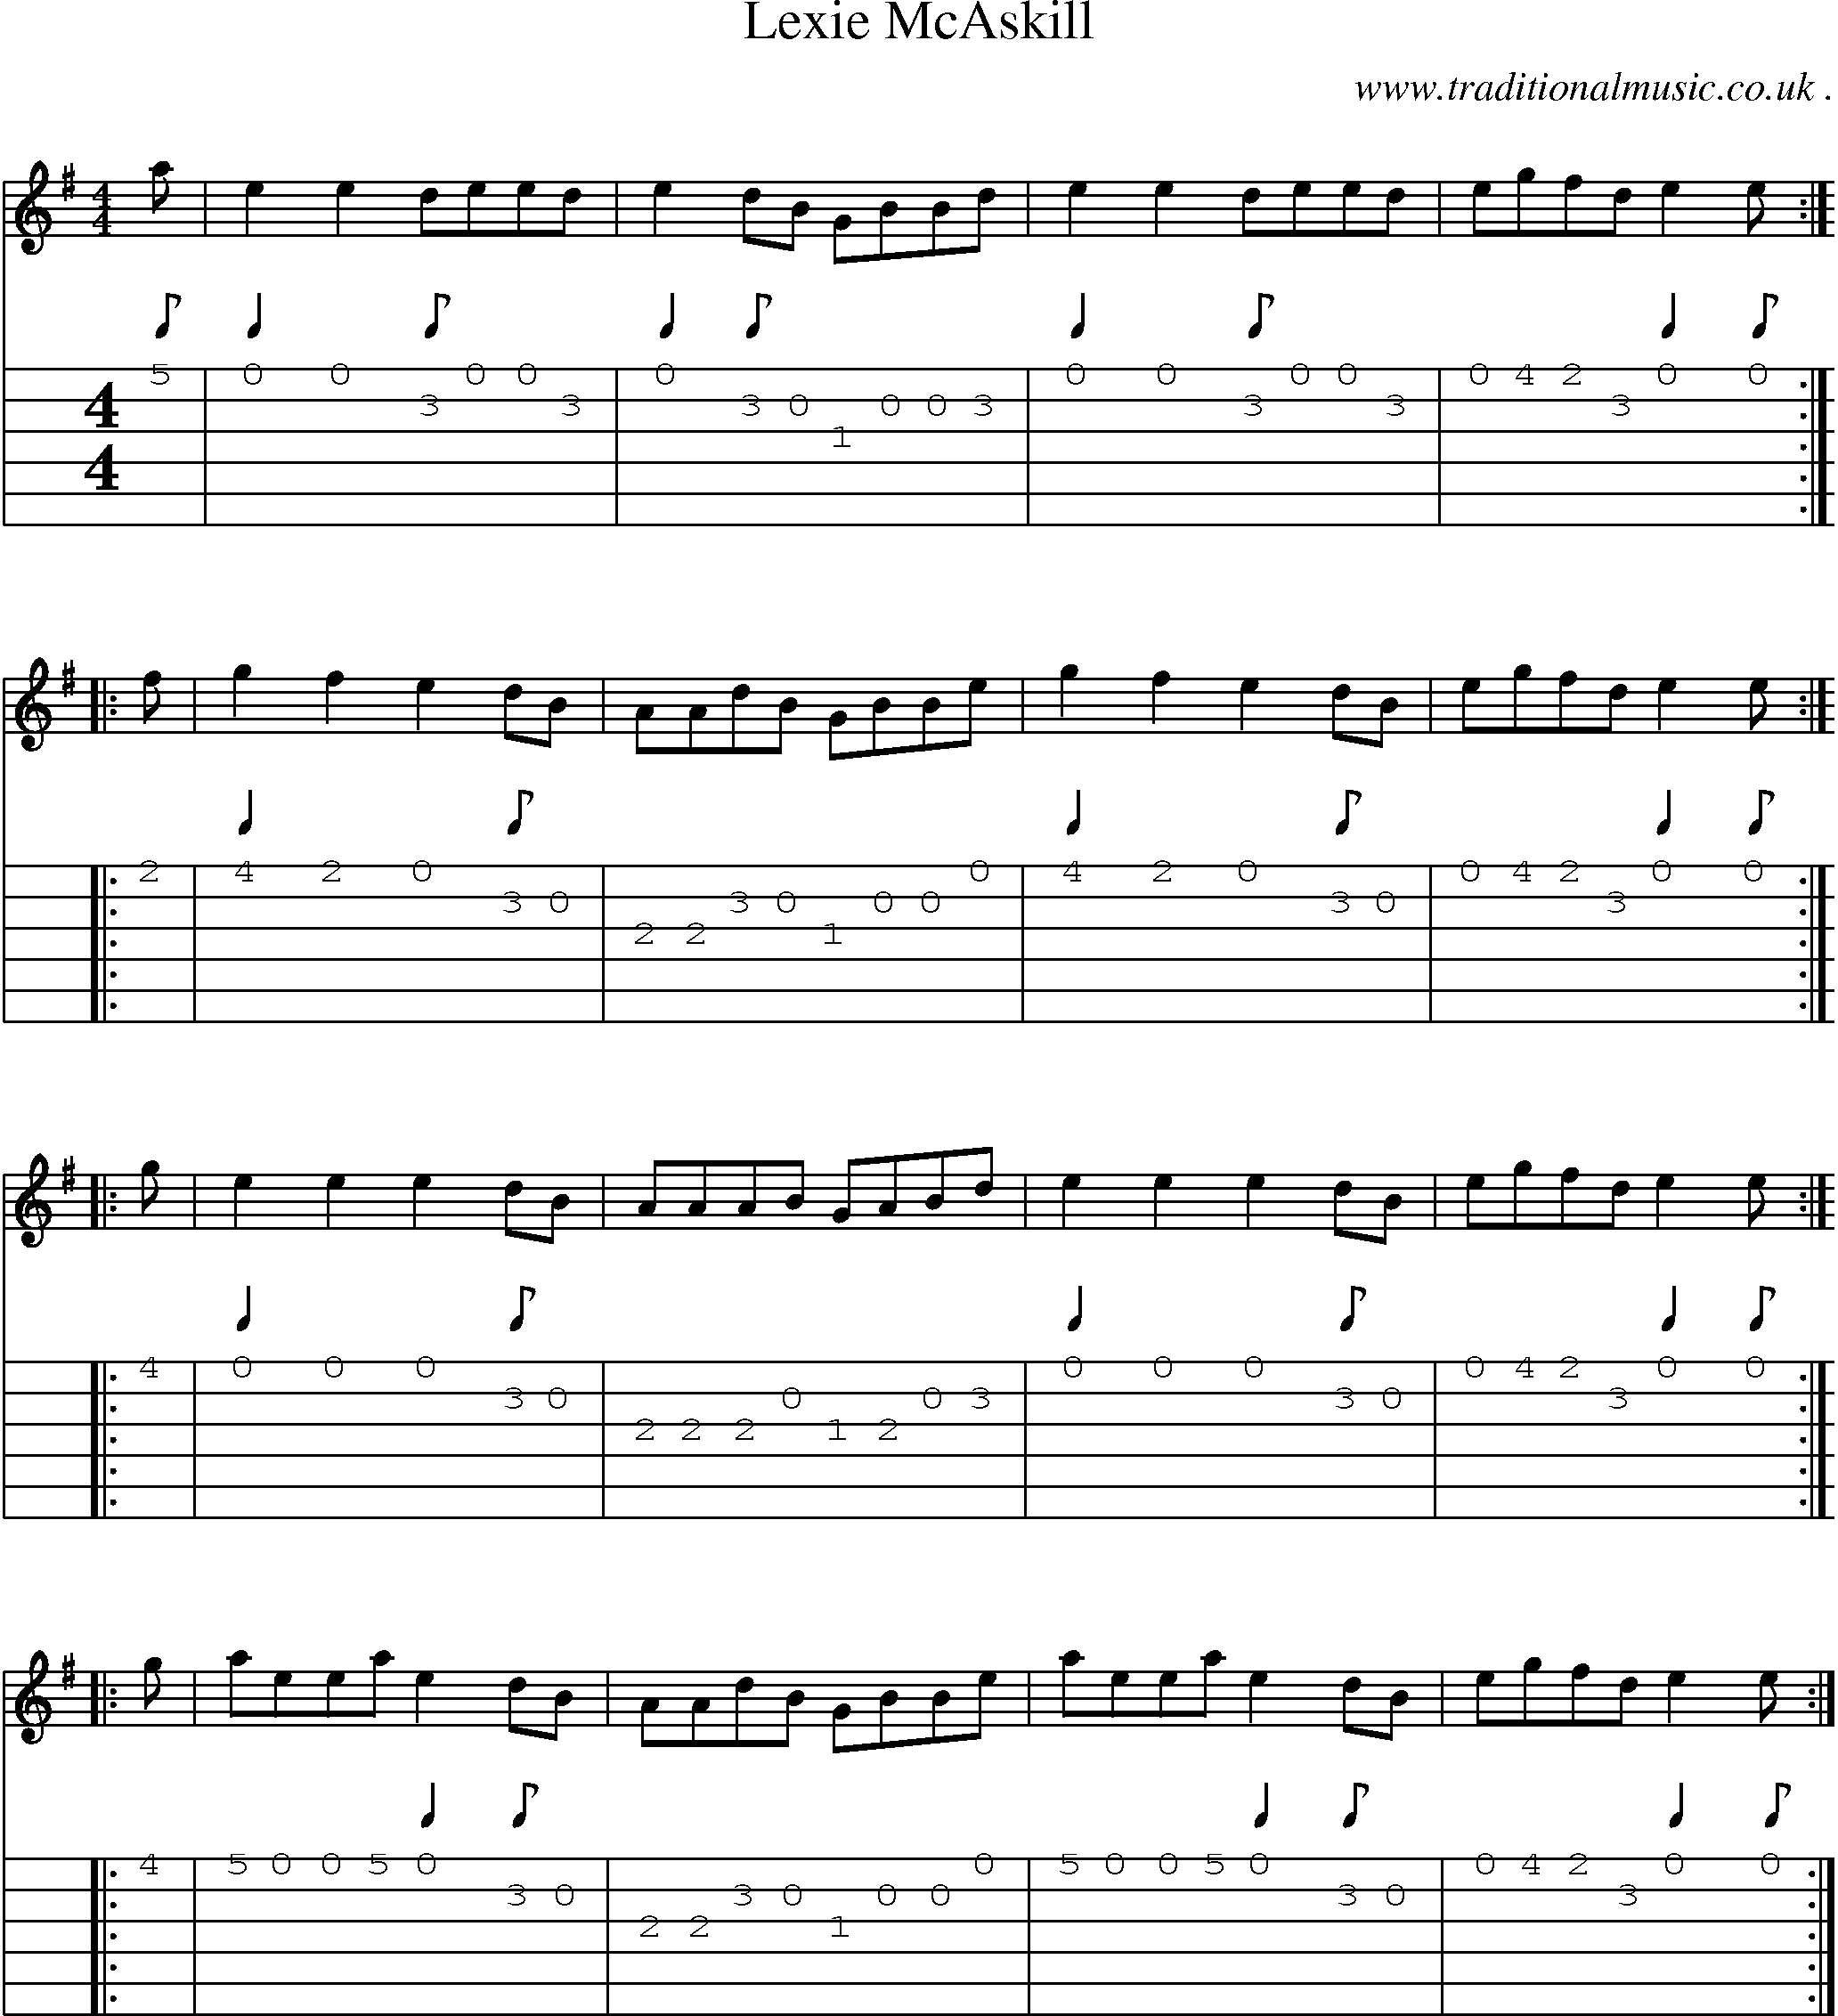 Sheet-Music and Guitar Tabs for Lexie Mcaskill